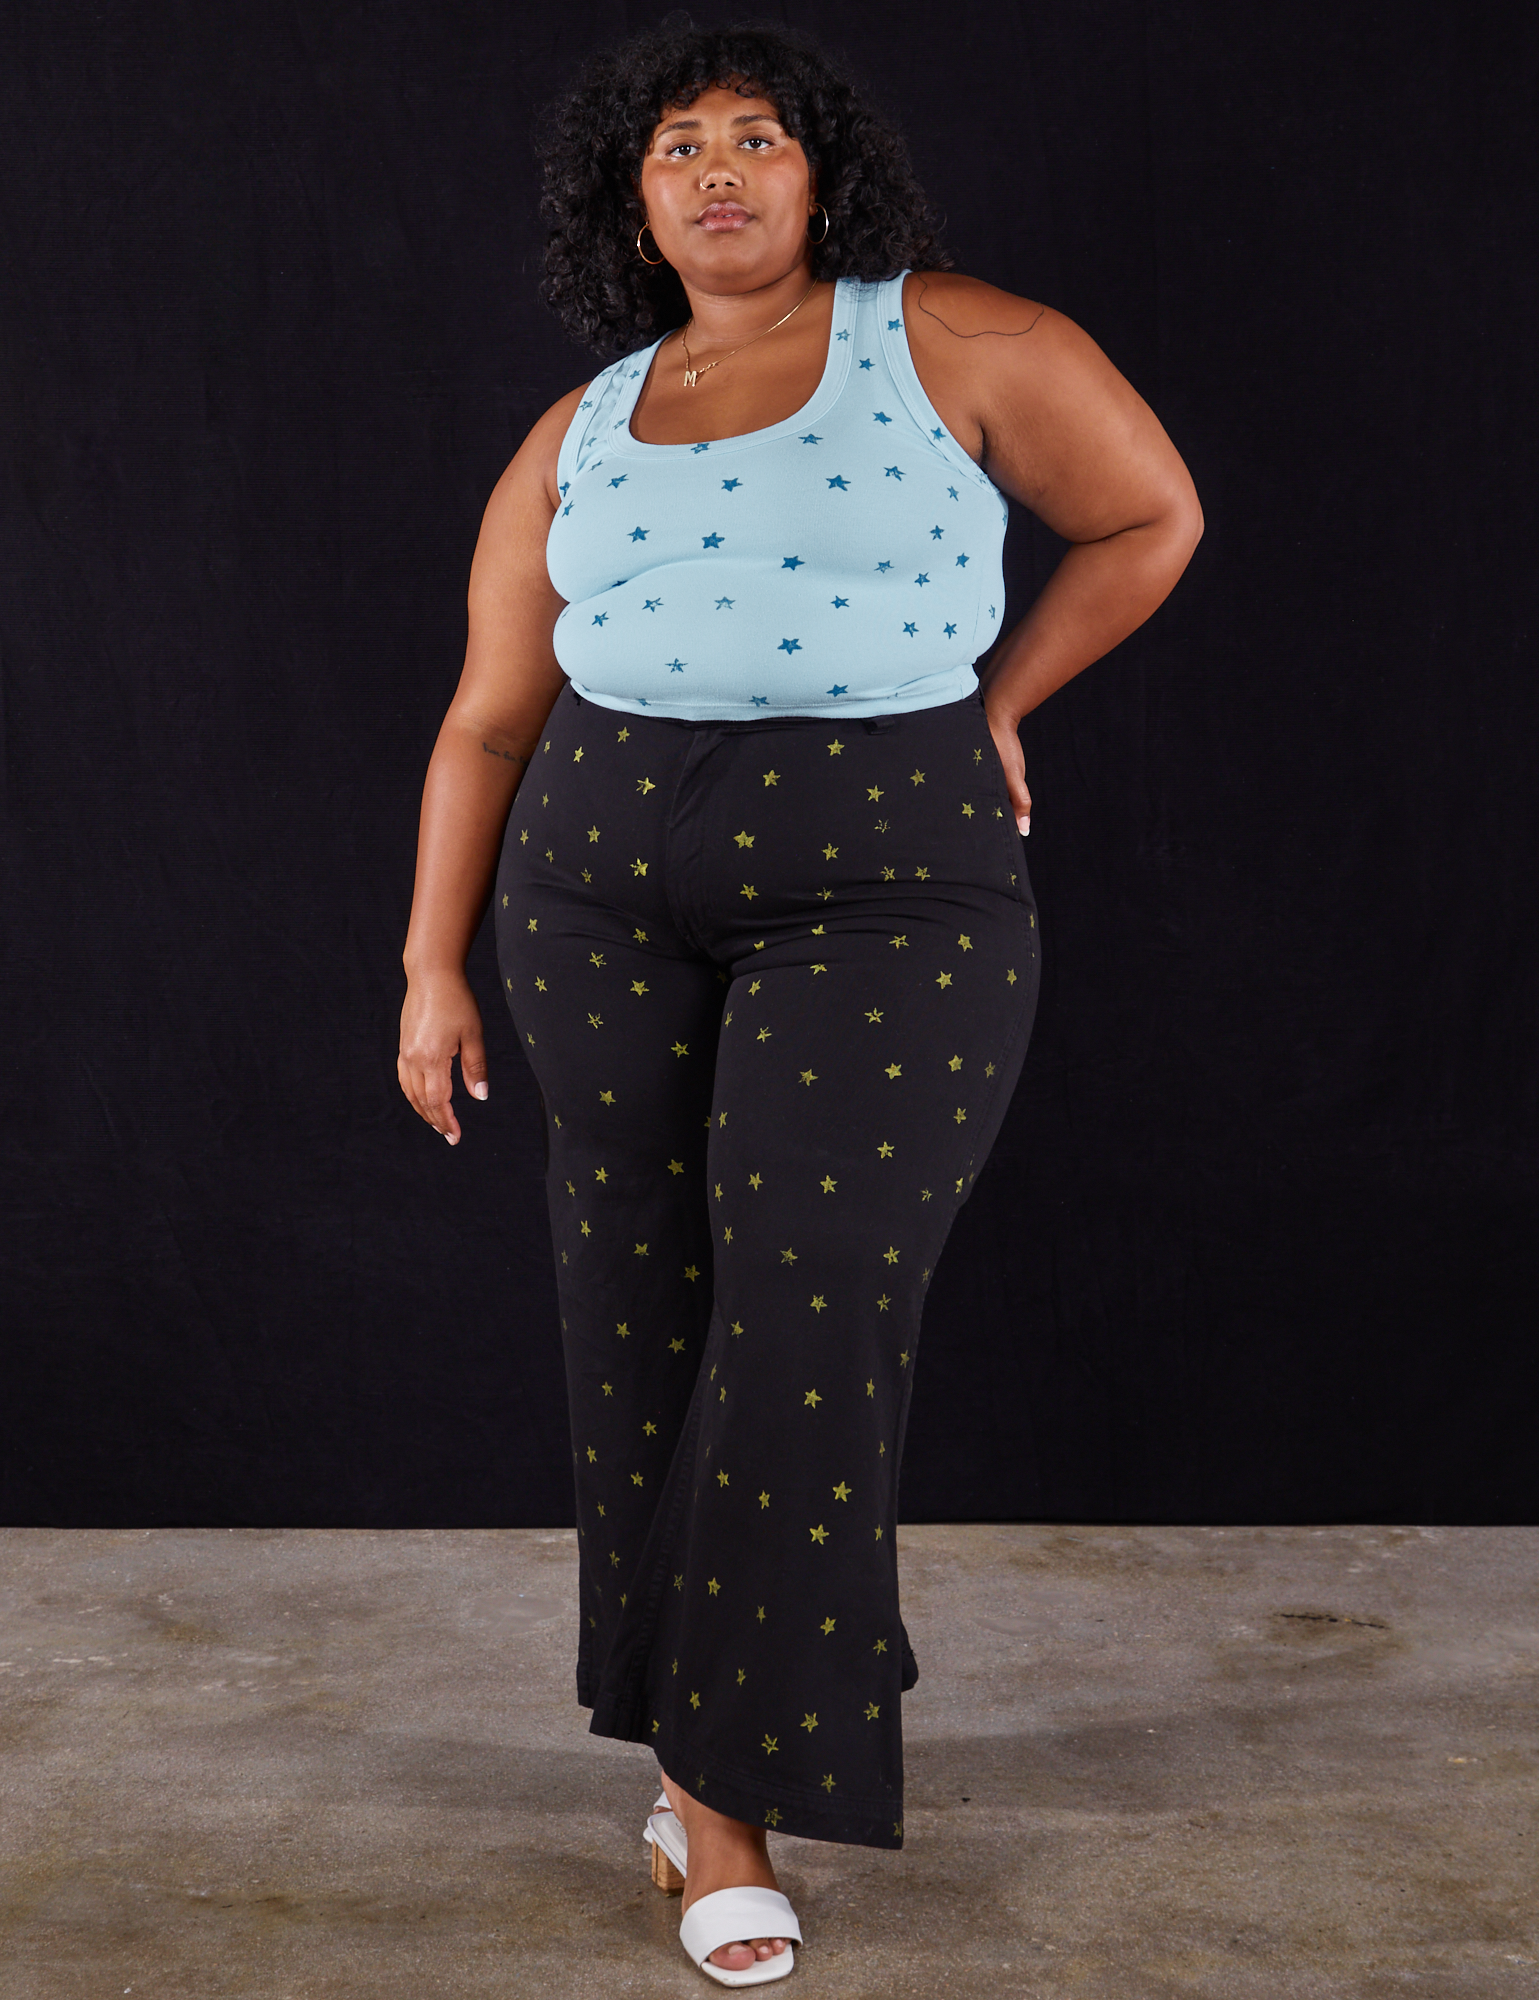 Morgan is wearing Star Bell Bottoms in Black and Star Tank Top in blue